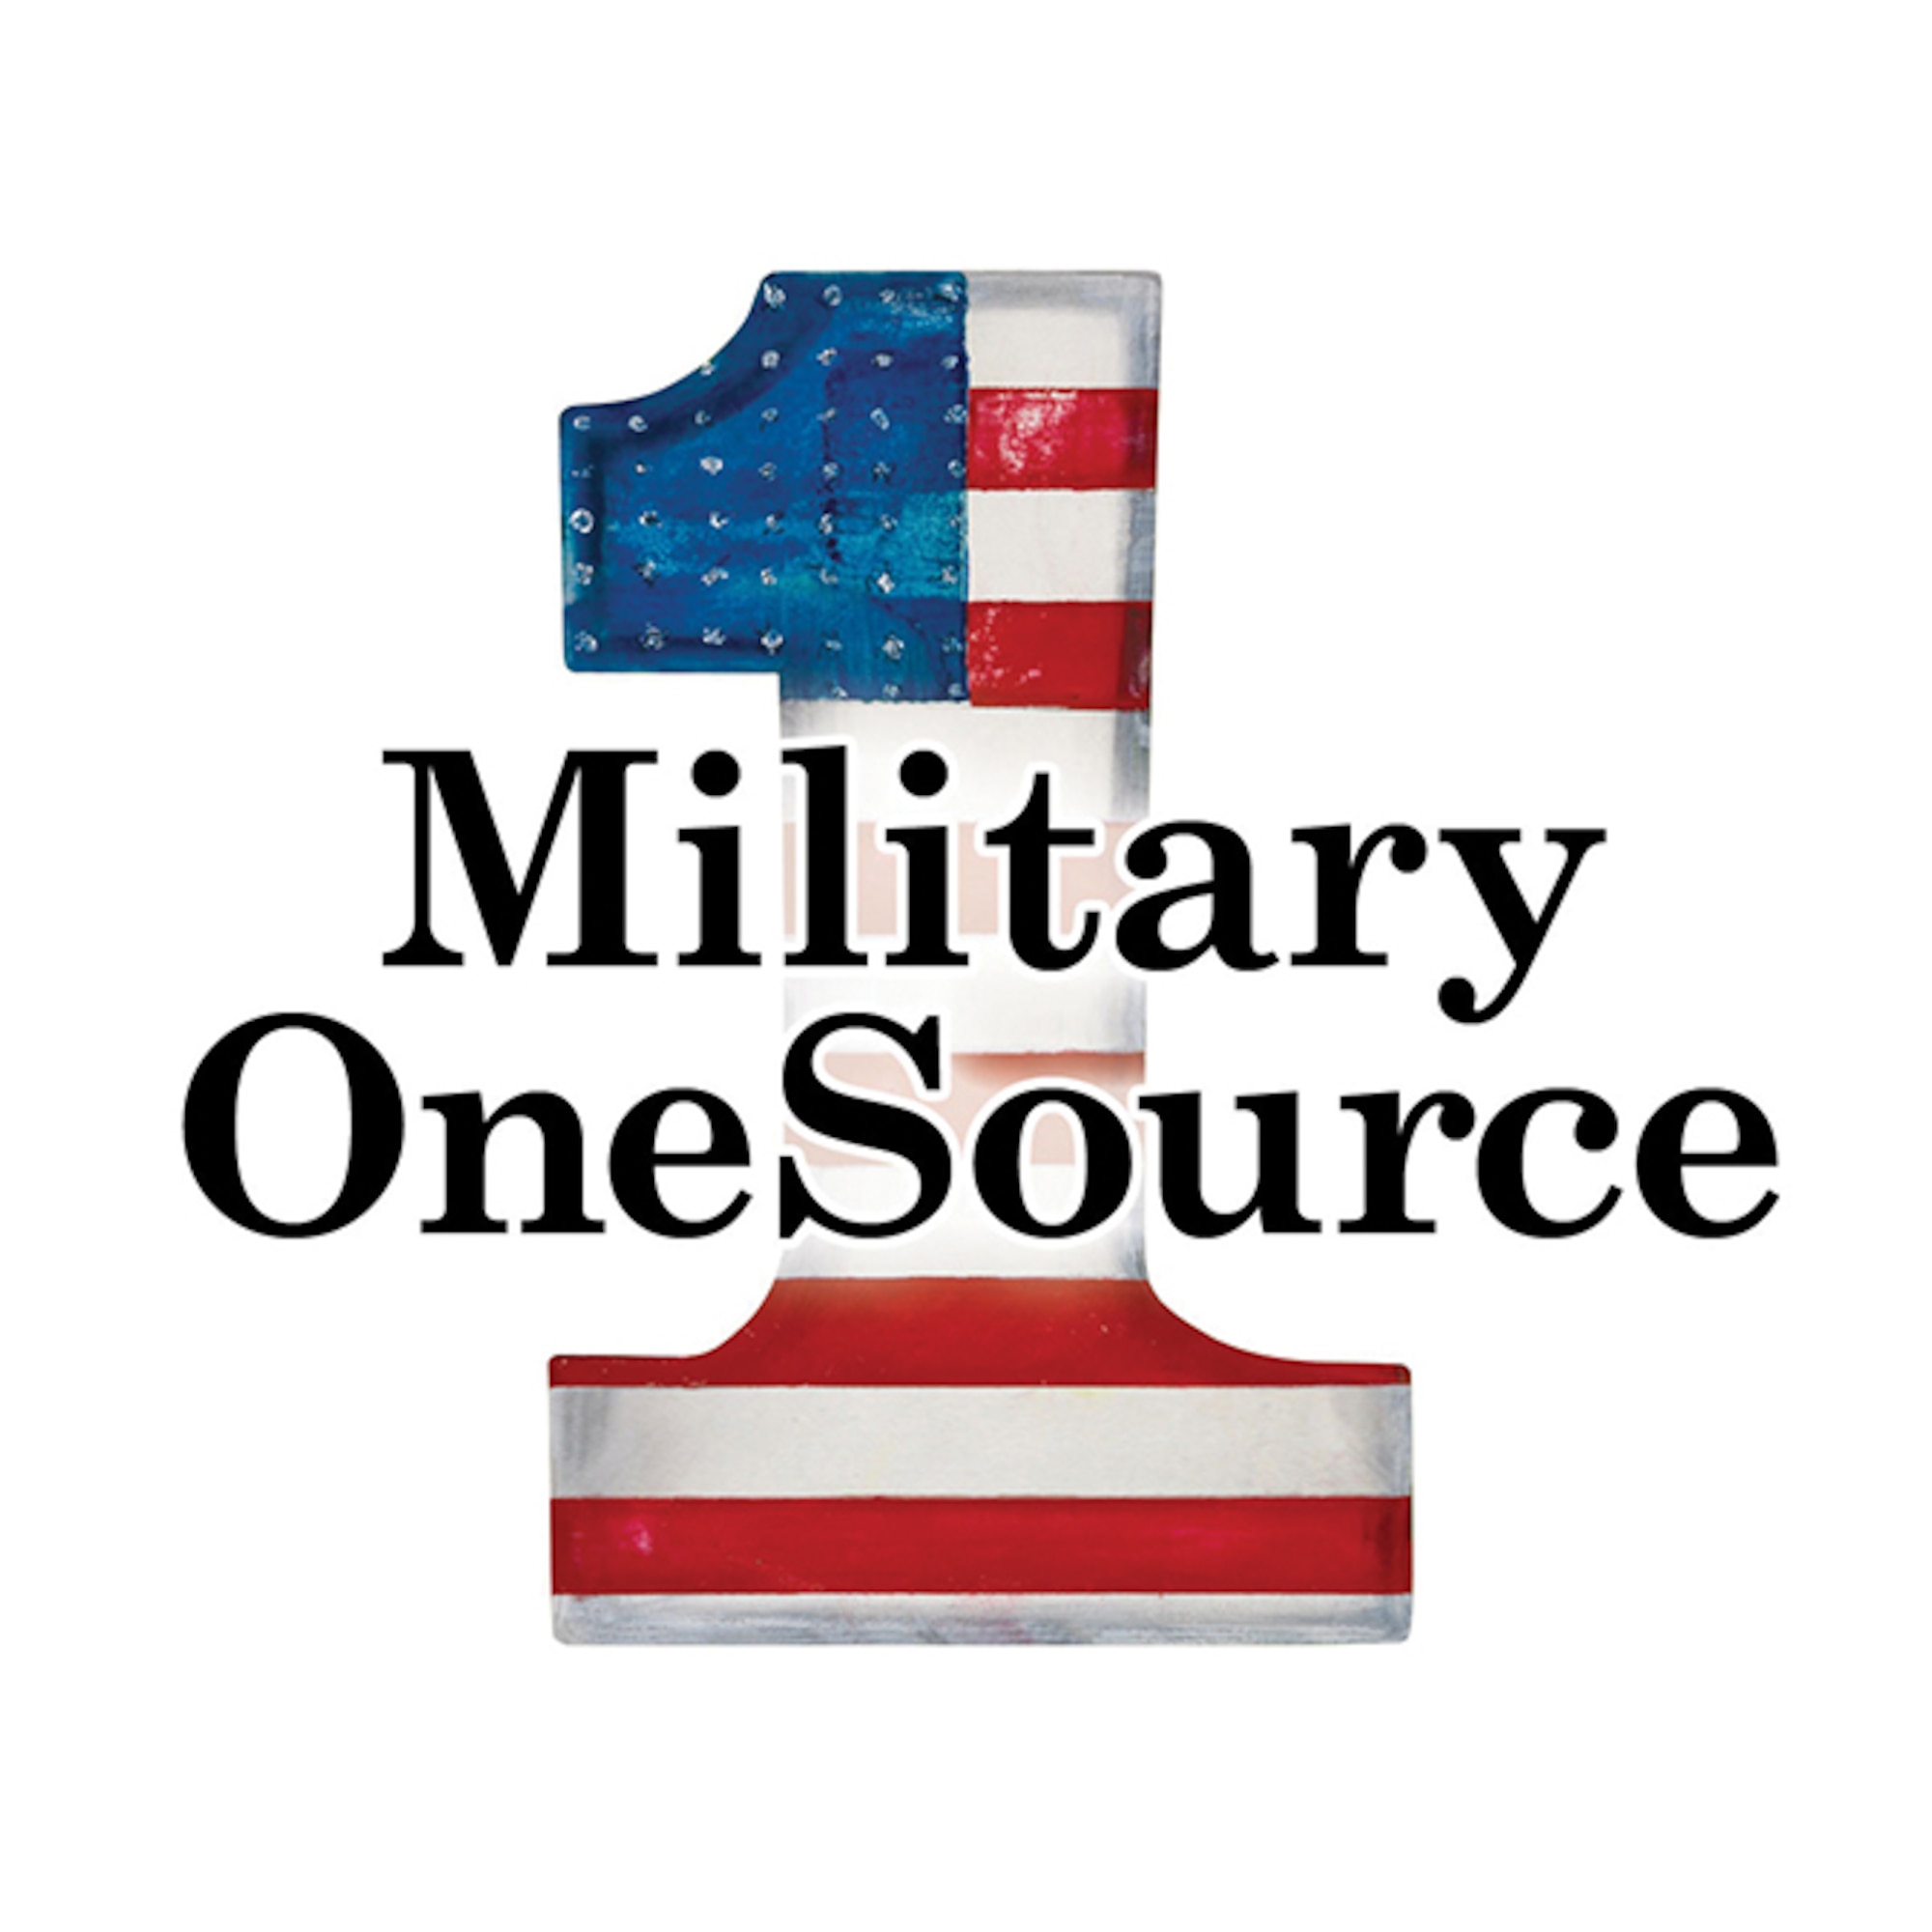 Call (800) 342-9647
Click MilitaryOneSource.mil
Connect 24/7/365
Discover more of what Military OneSource has to offer by visiting www.militaryonesource.mil/non-medical-counseling or calling (800) 342-9647.